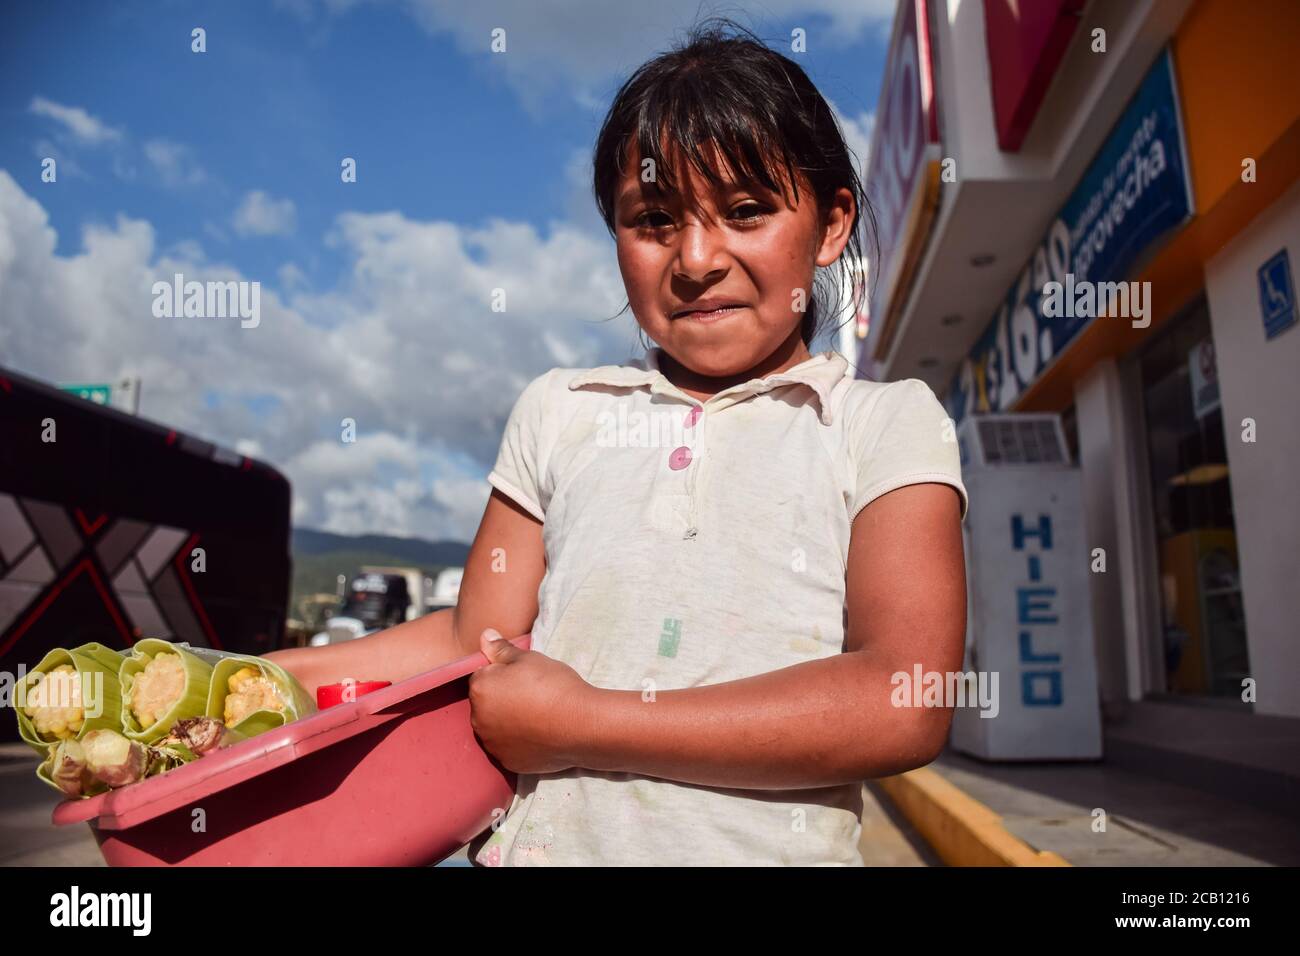 Chiapas / Mexico - September 15, 2016: portrait of little mexican girl selling boiled ears of corn at gas station Stock Photo